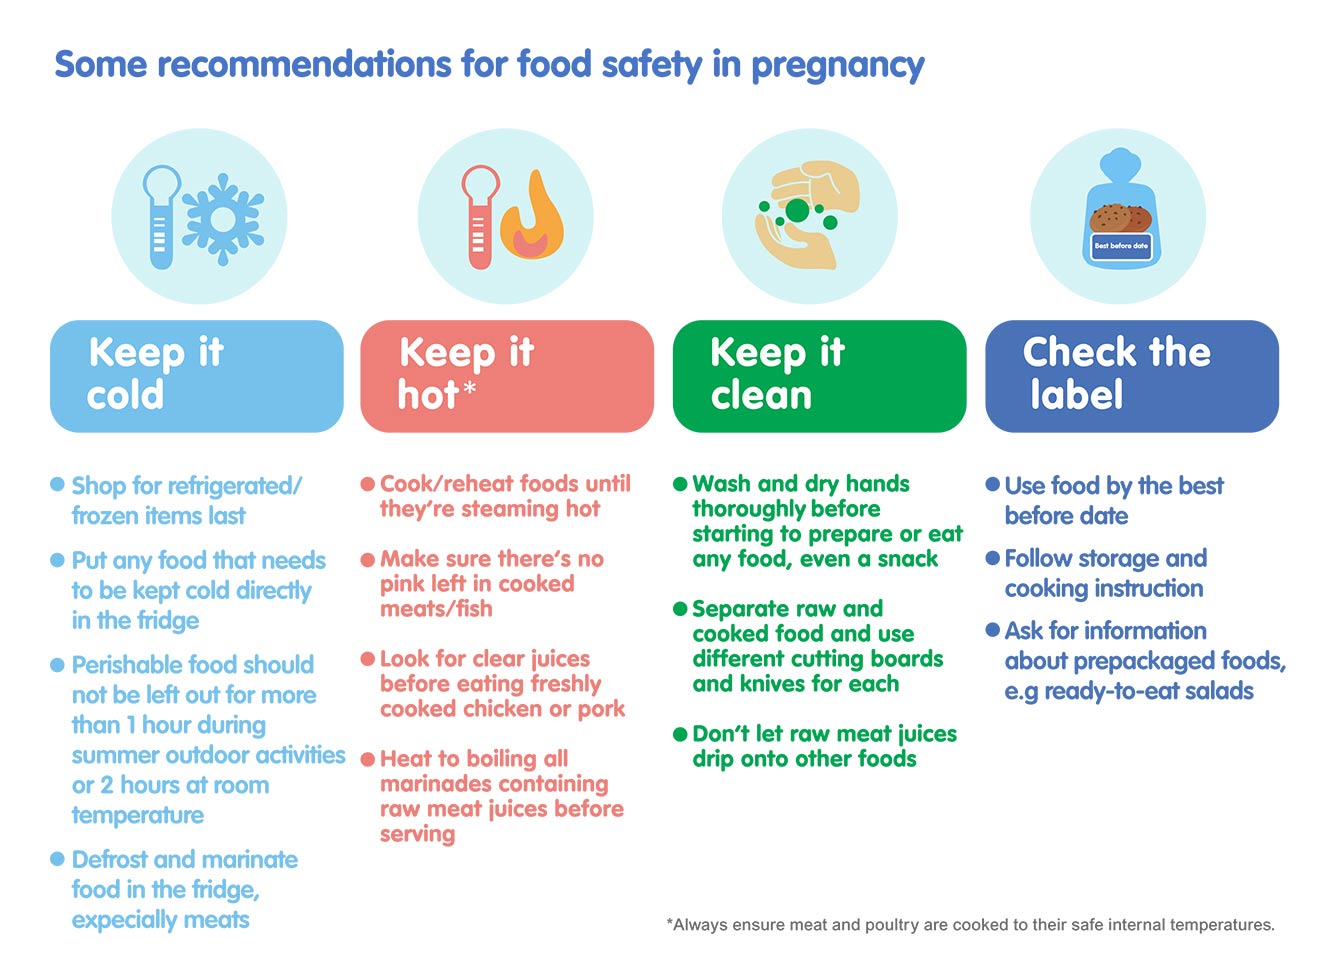 Some recommendations for food safety in pregnancy